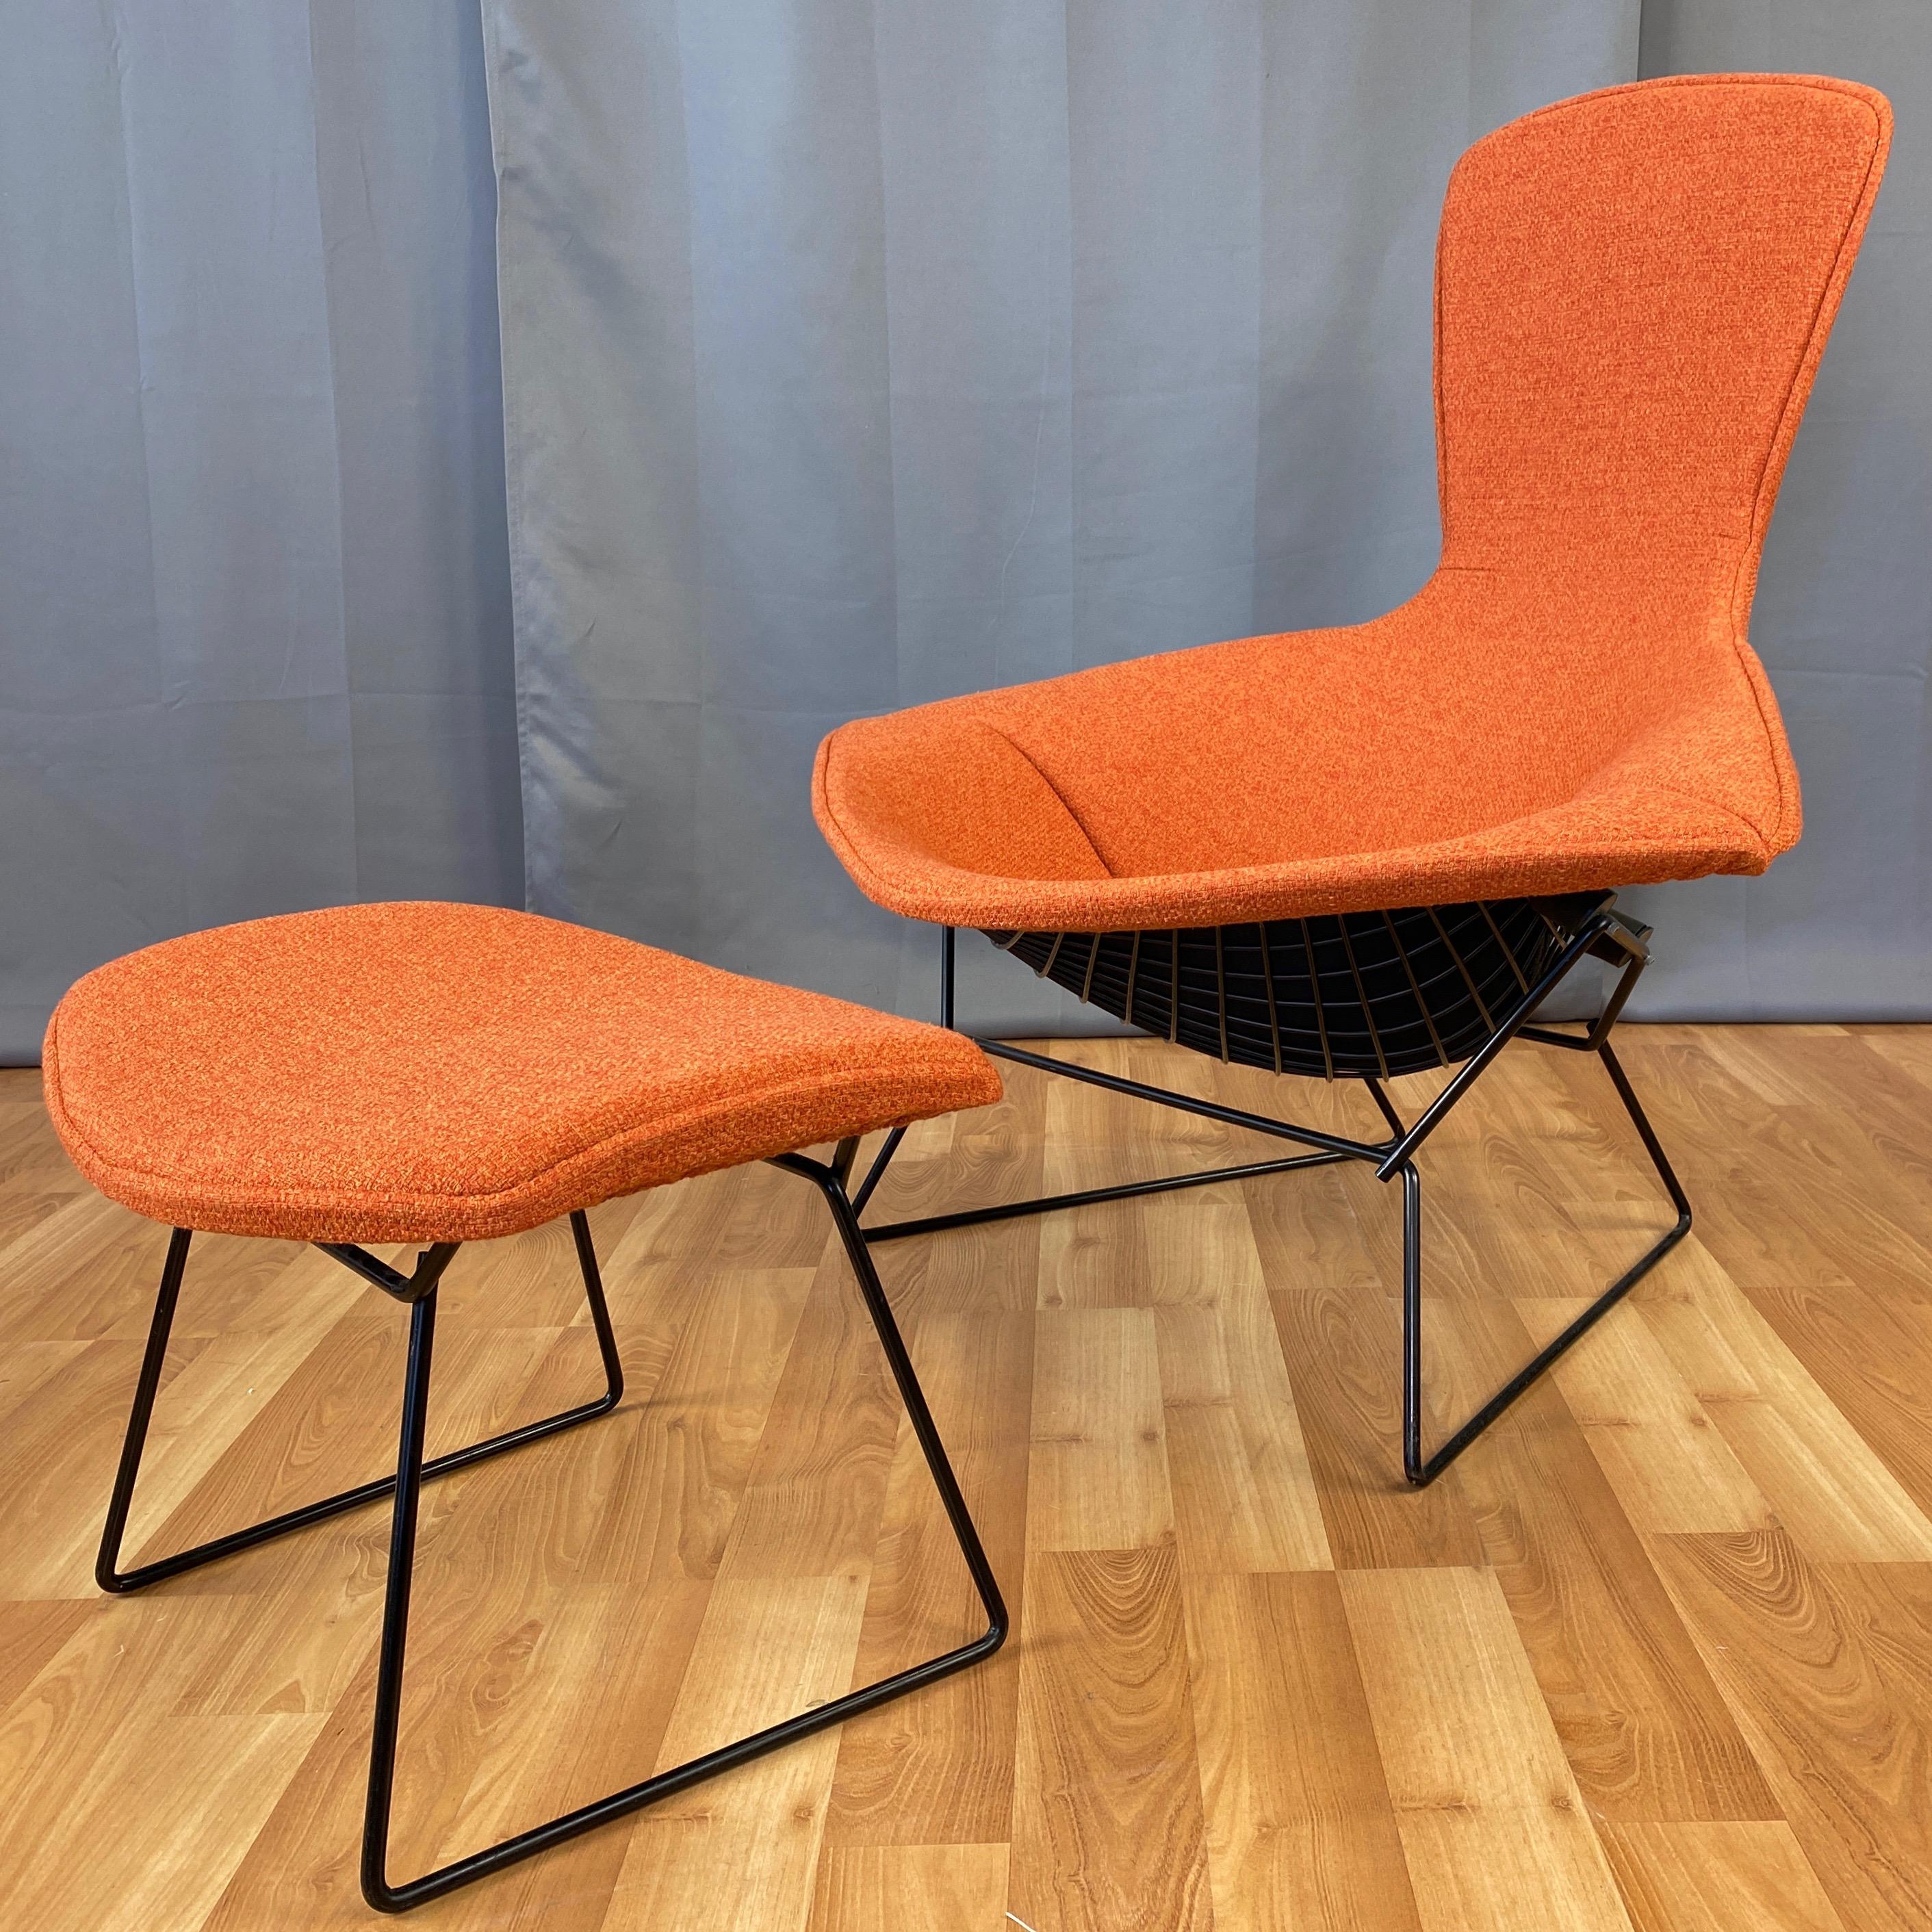 A 1980s Bird chair and ottoman by Harry Bertoia for Knoll with black frames and new two-tone orange upholstery covers.

Designed by Bertoia as part of his 1952 collection for Knoll, the Bird chair’s sculptural form, distinctive silhouette, and